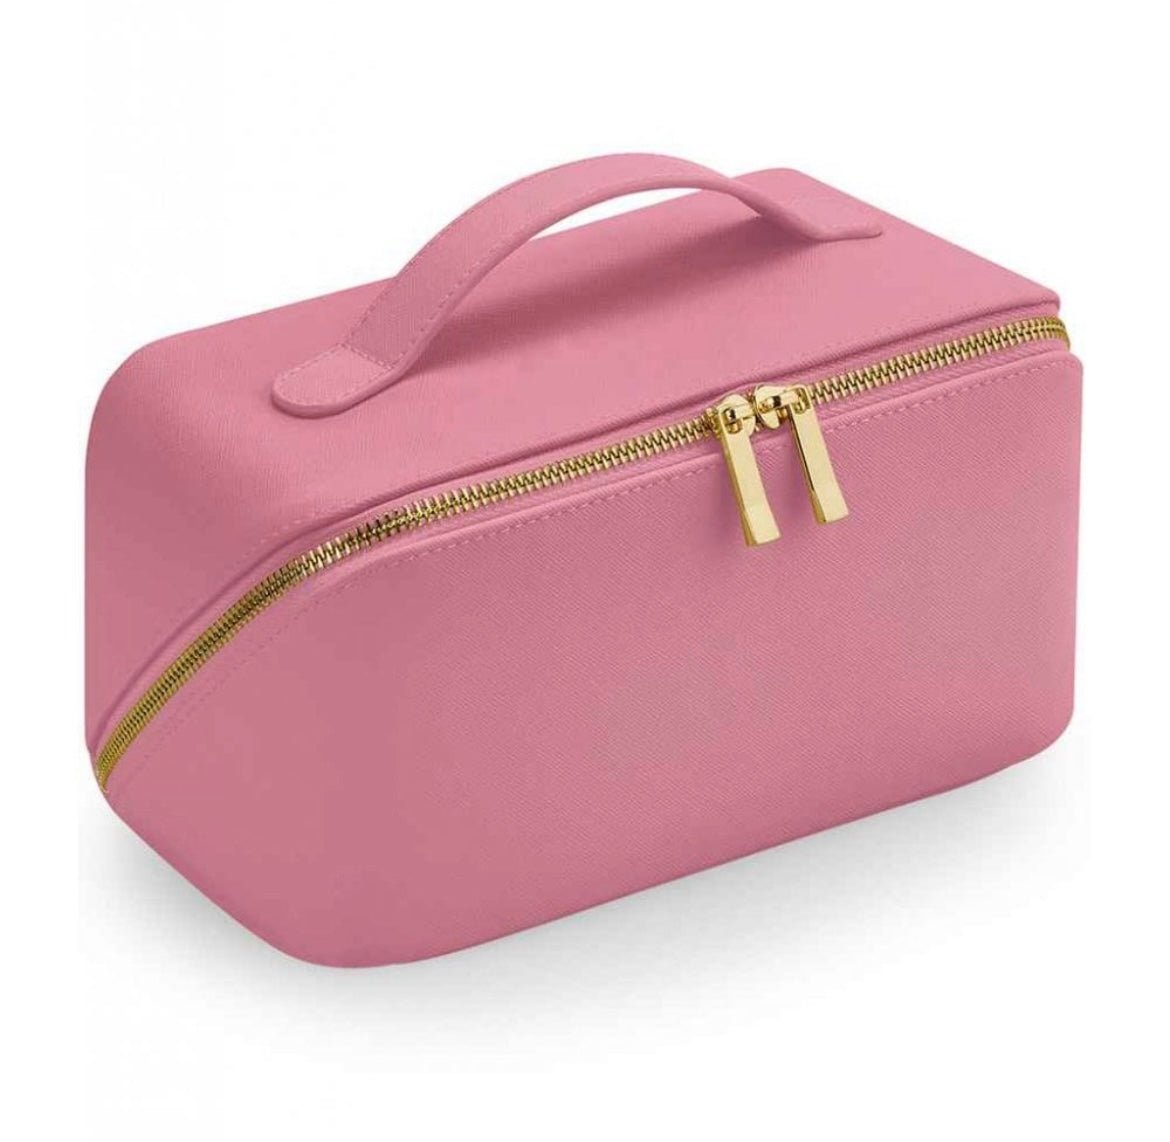 Open Flat Accessory Case - Large - sweetassistant